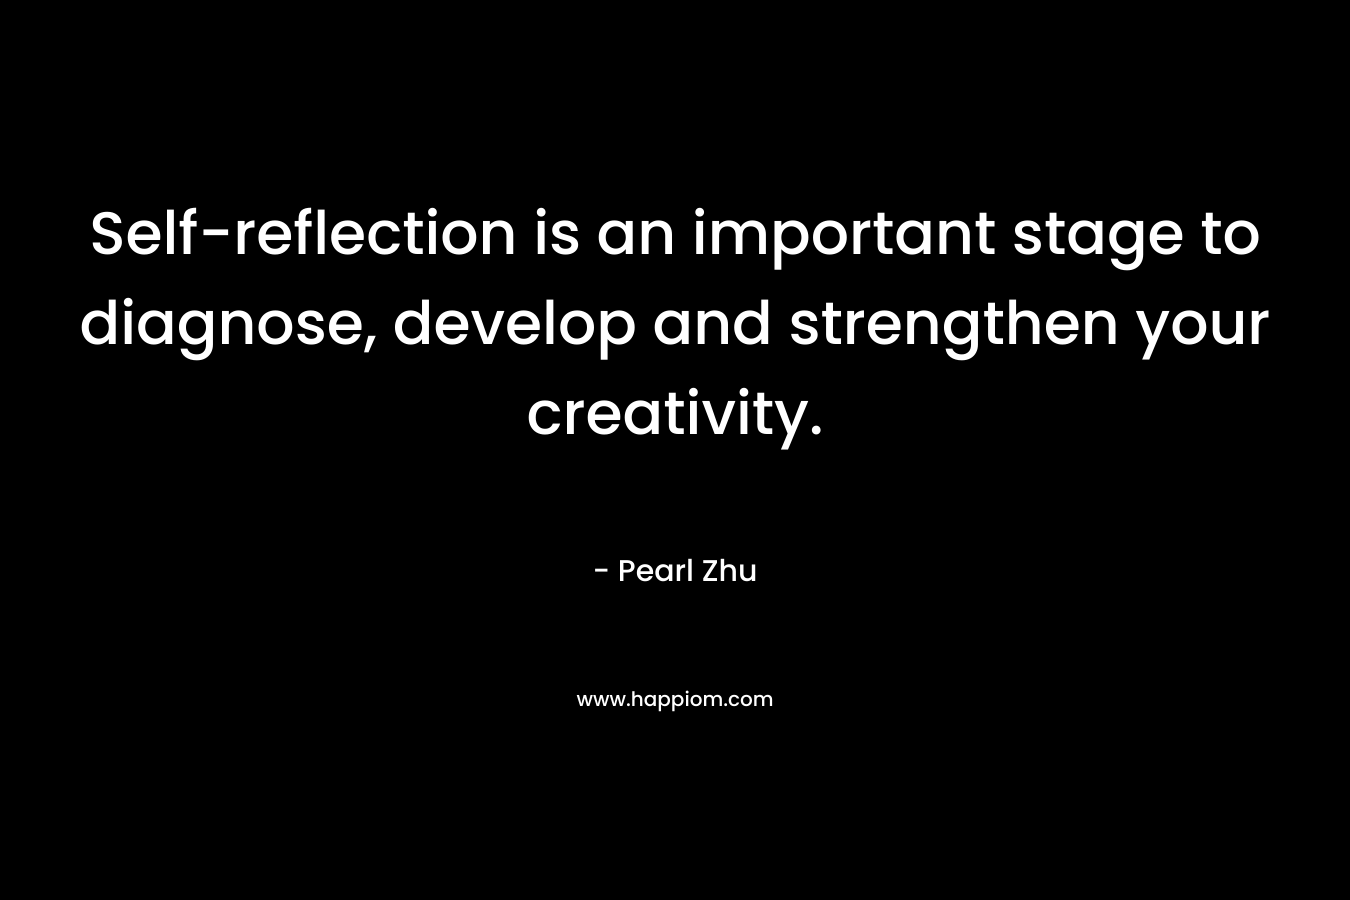 Self-reflection is an important stage to diagnose, develop and strengthen your creativity.